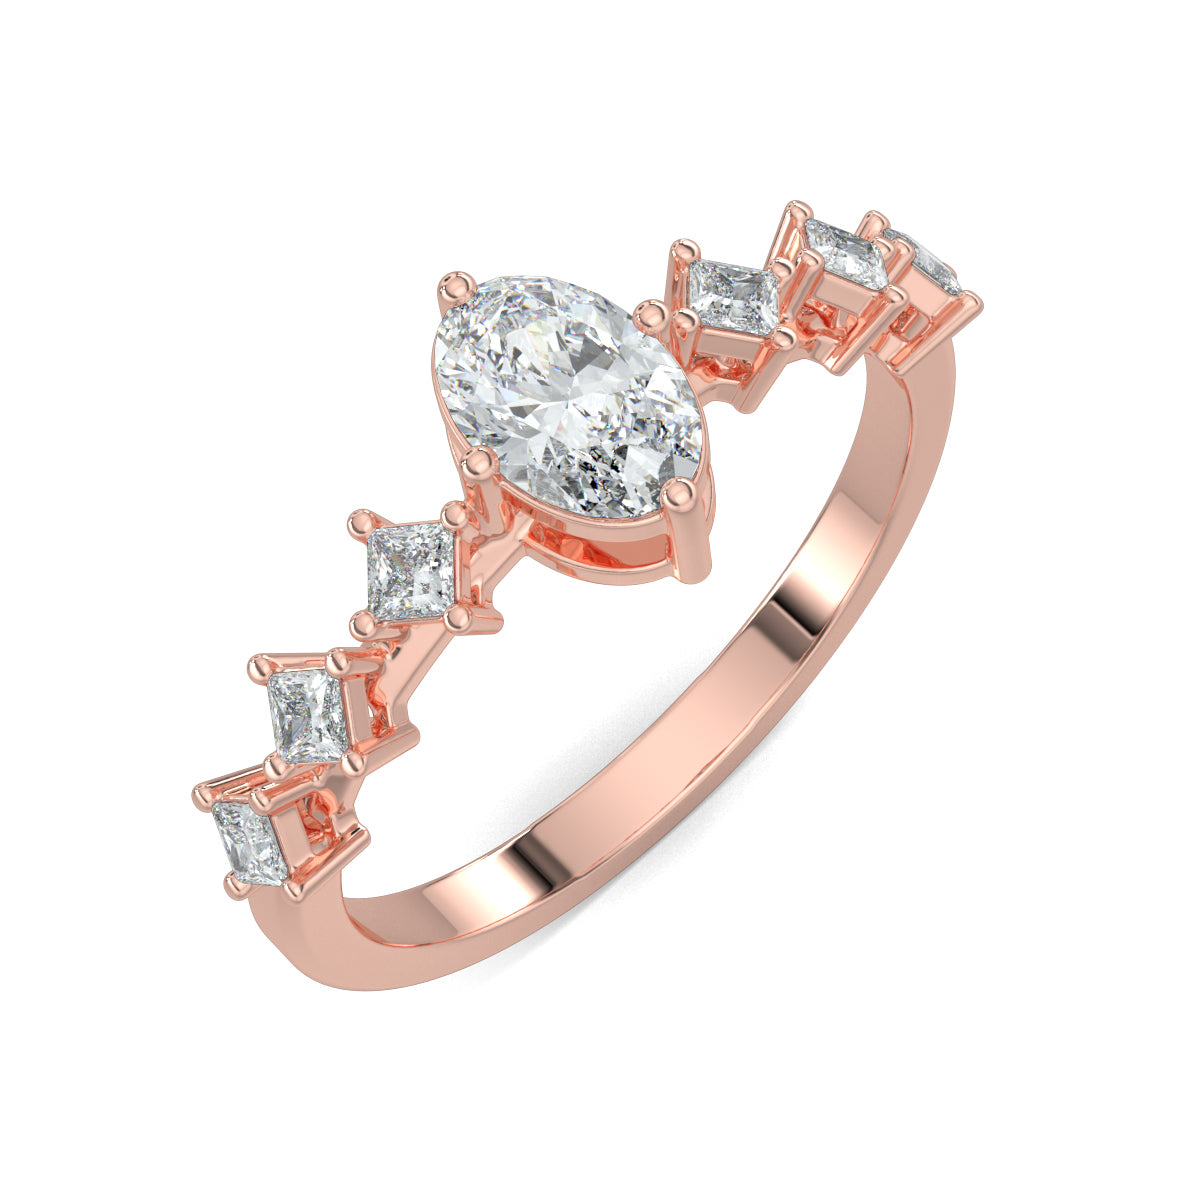 Rose Gold, Diamond Ring, oval solitaire diamond ring, natural diamonds, lab-grown diamonds, princess band ring, engagement ring, ethical jewelry, diamond jewelry, luxury ring, solitaire ring, oval cut diamond, princess cut diamonds